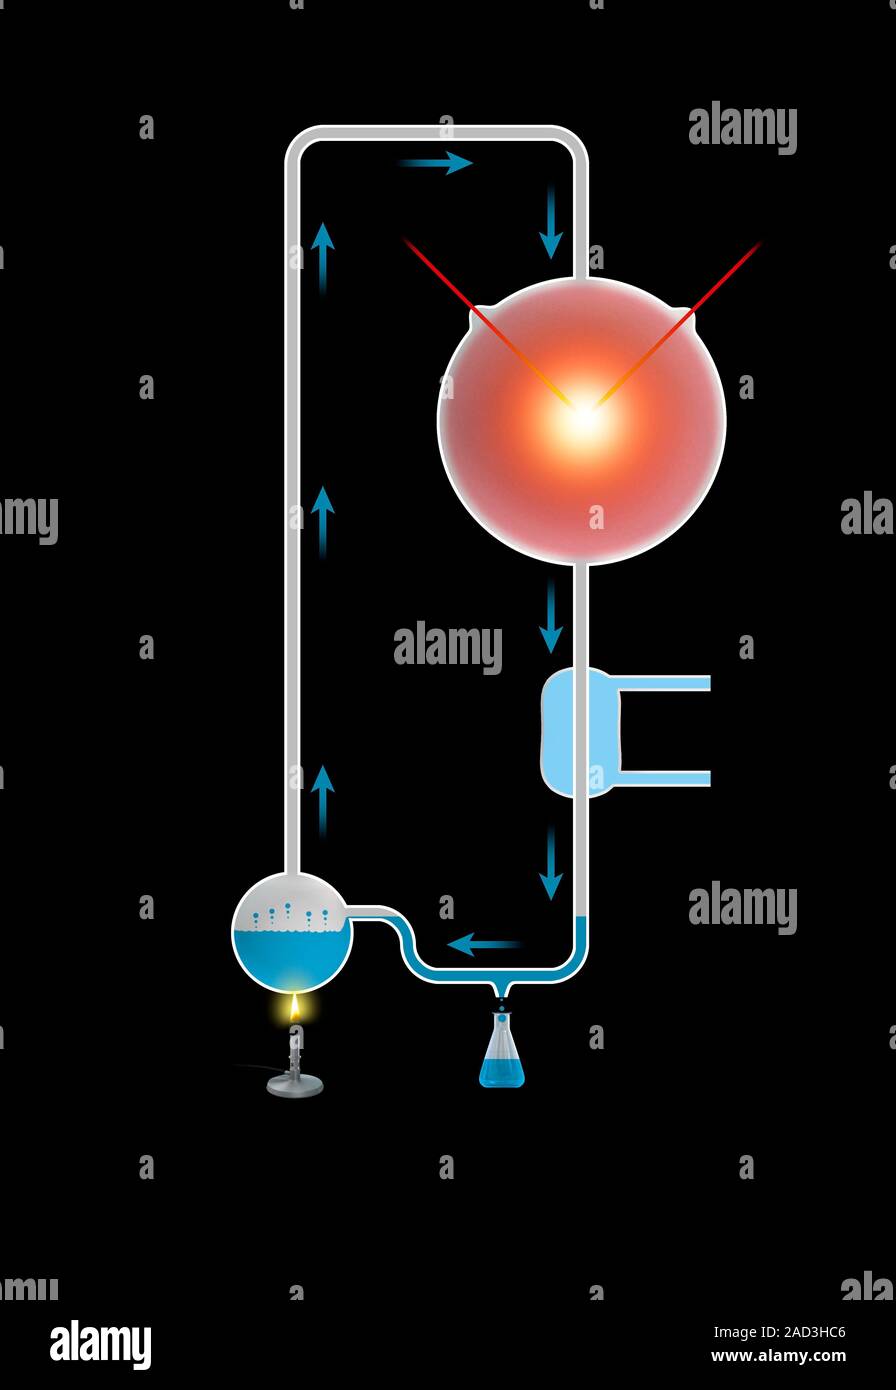 Miller-Urey experiment. Computer illustration showing the apparatus ...